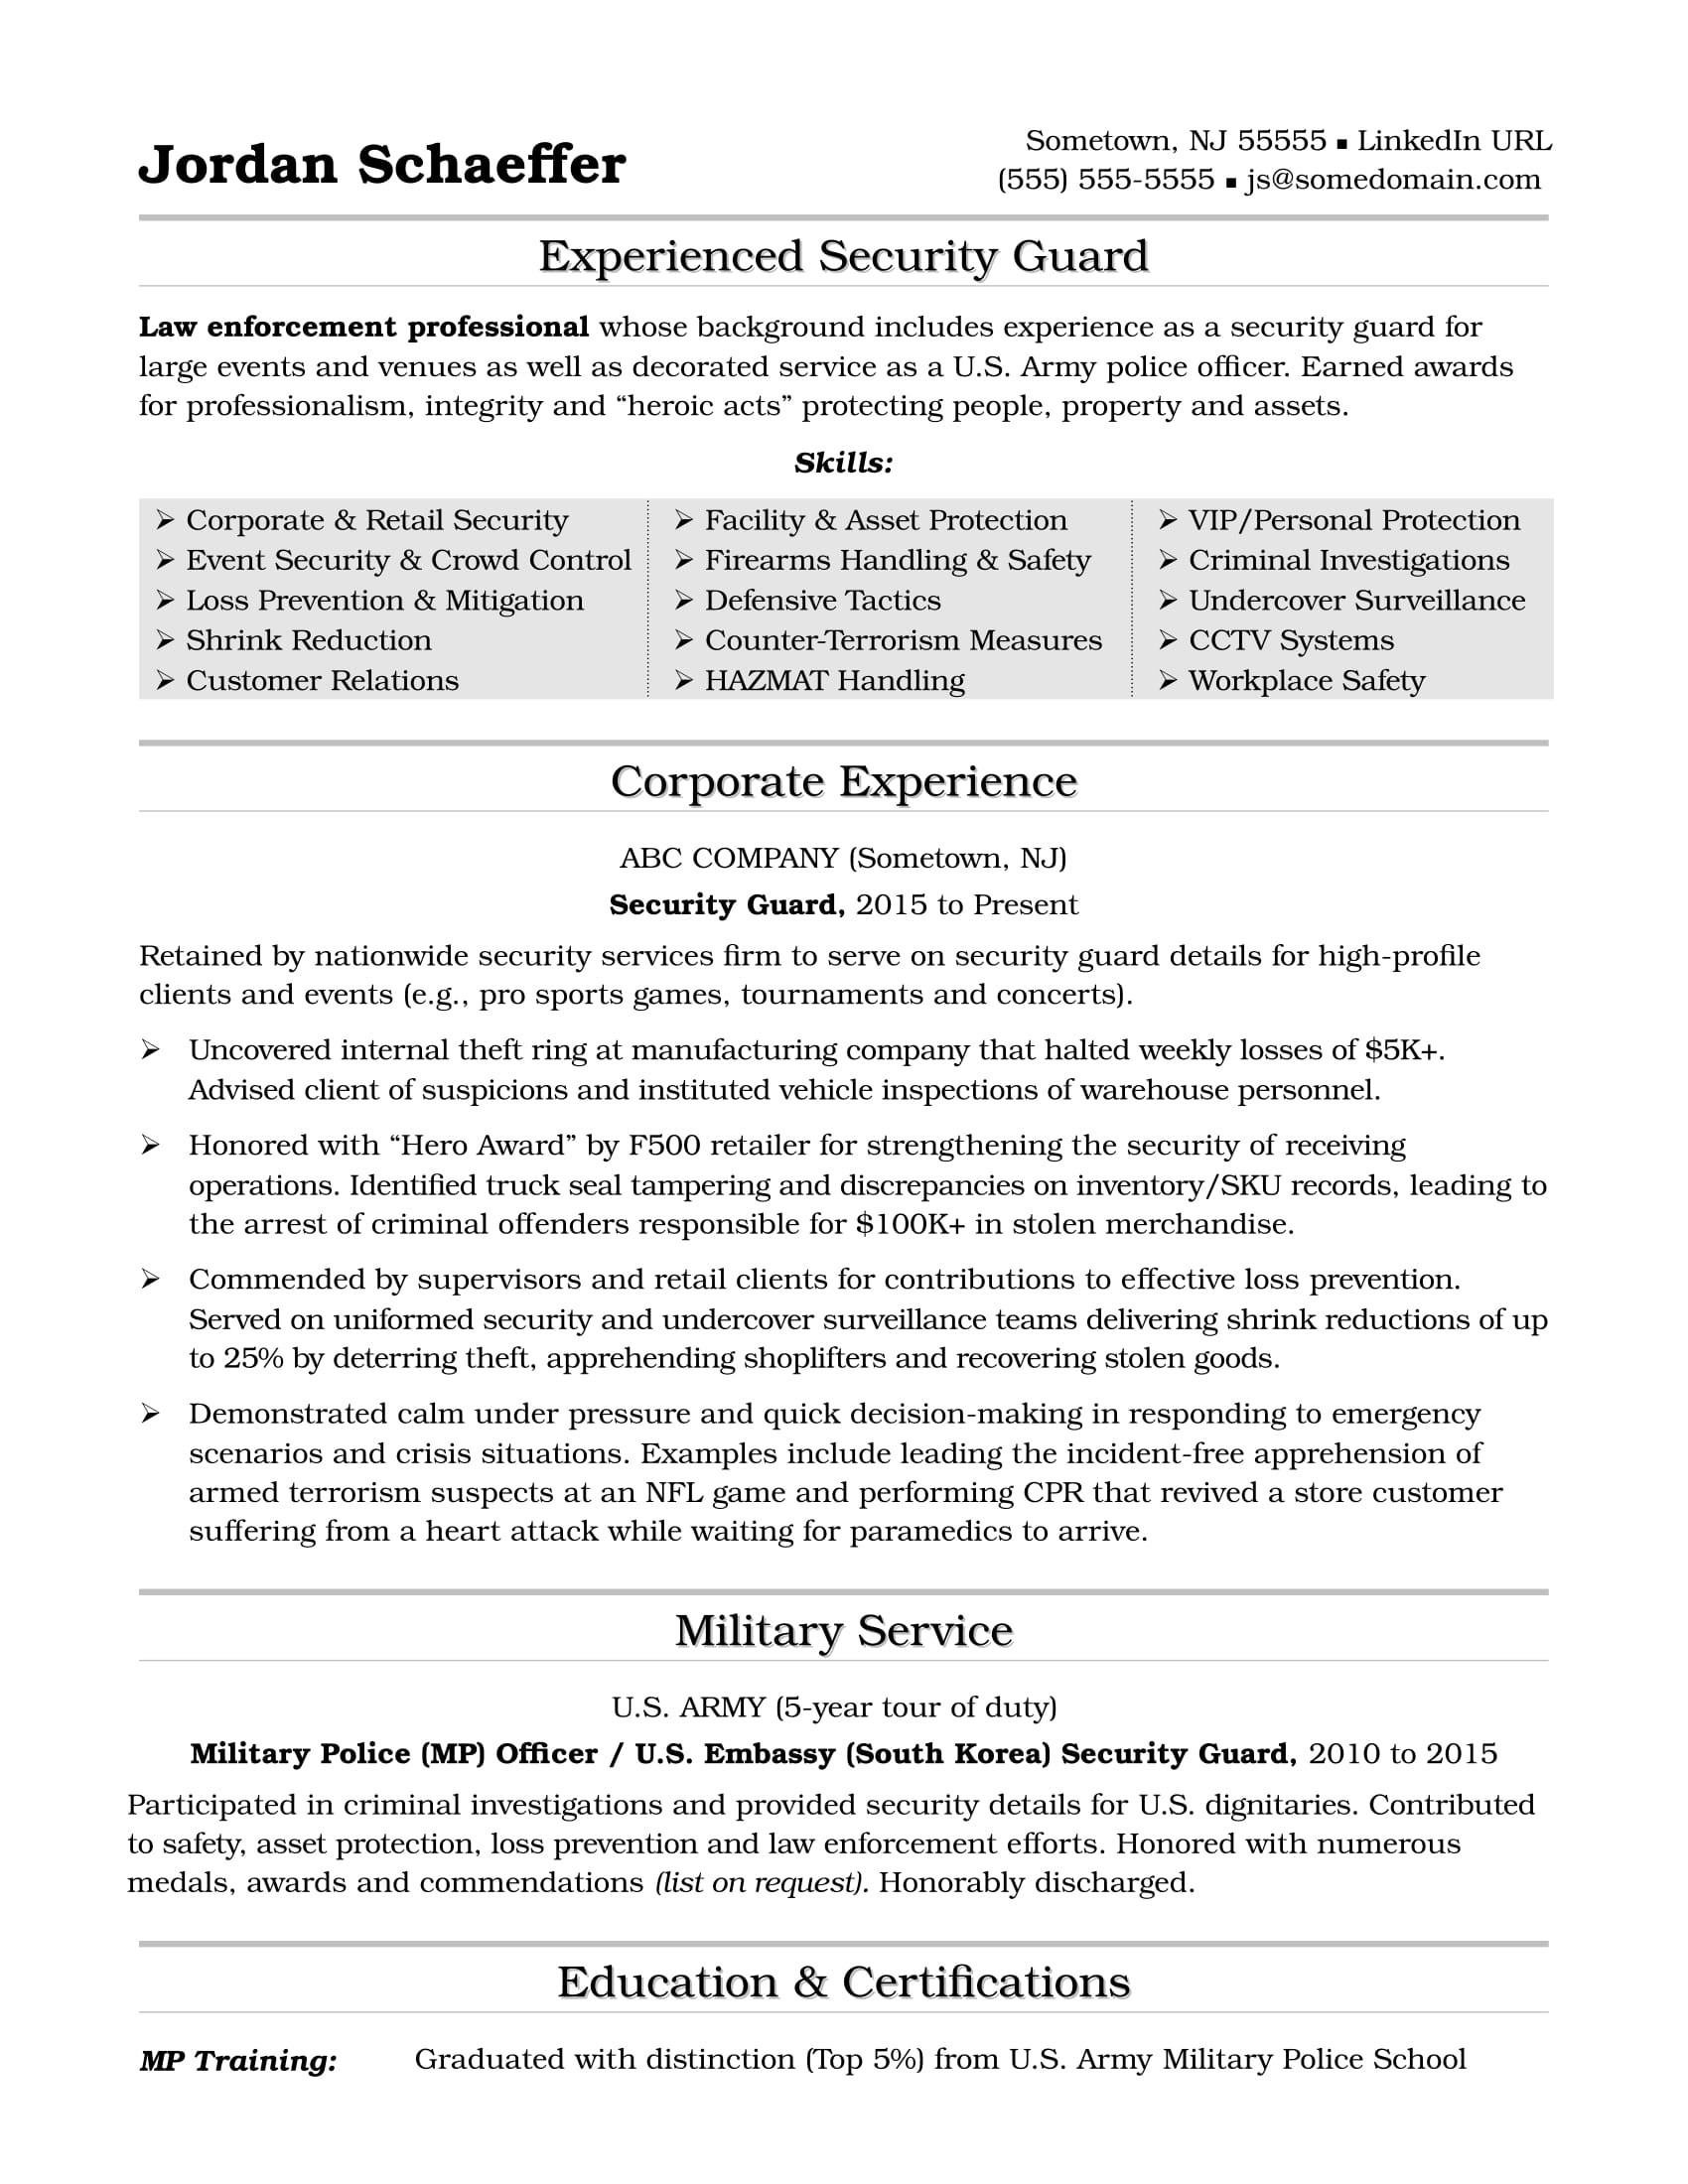 Resume Sample for A Security Guard Security Guard Resume Monster.com